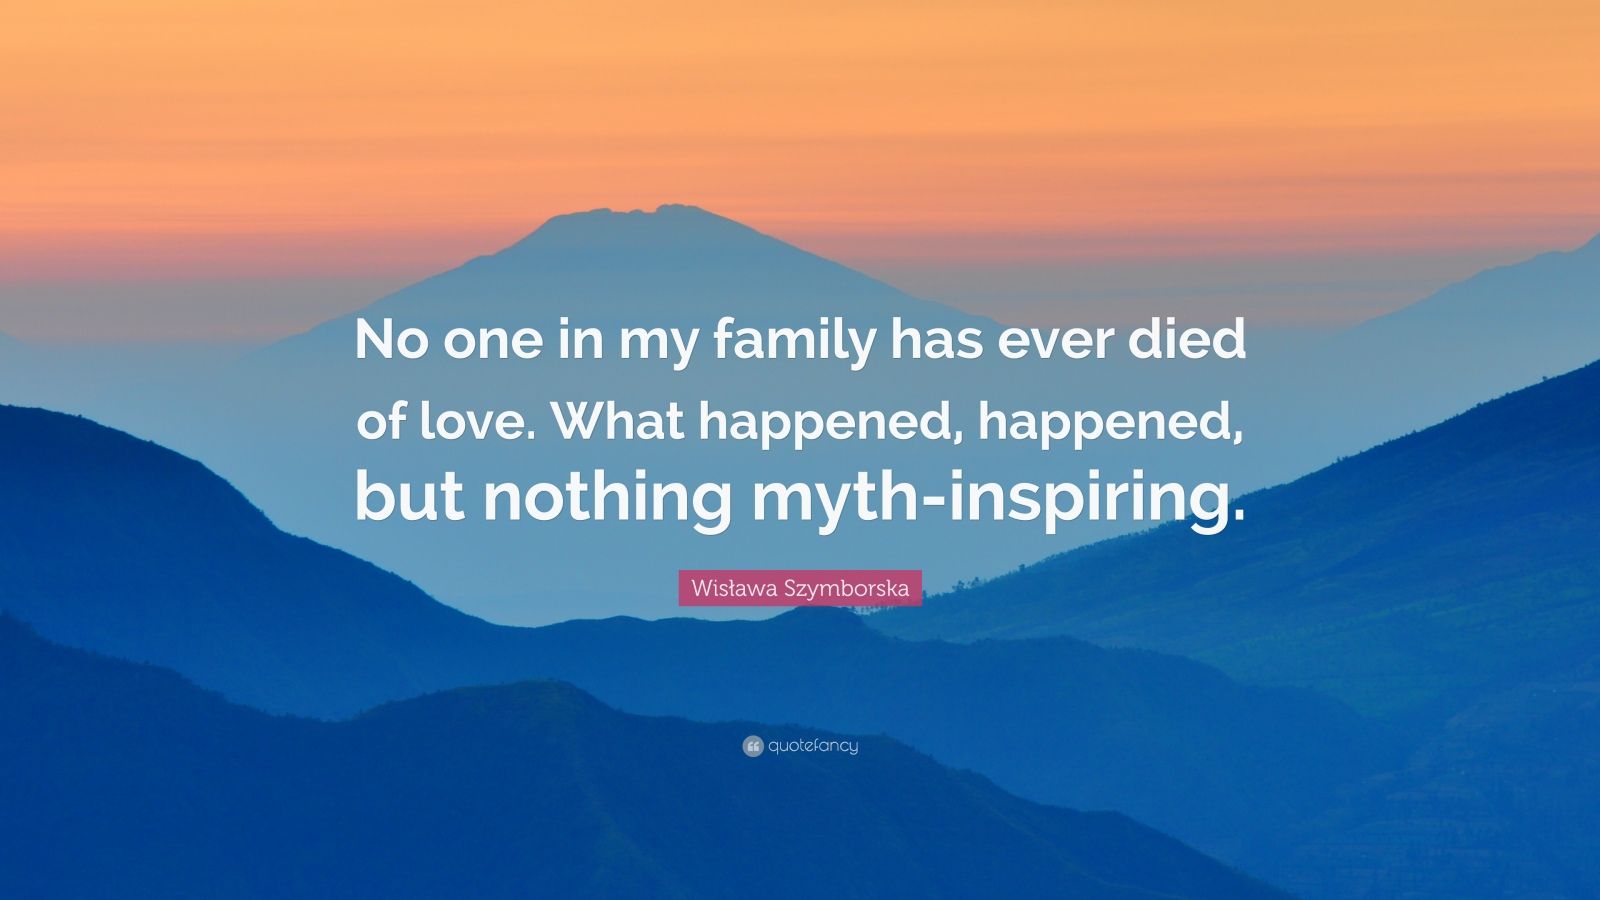 WisÅ‚awa Szymborska Quote “No one in my family has ever d of love